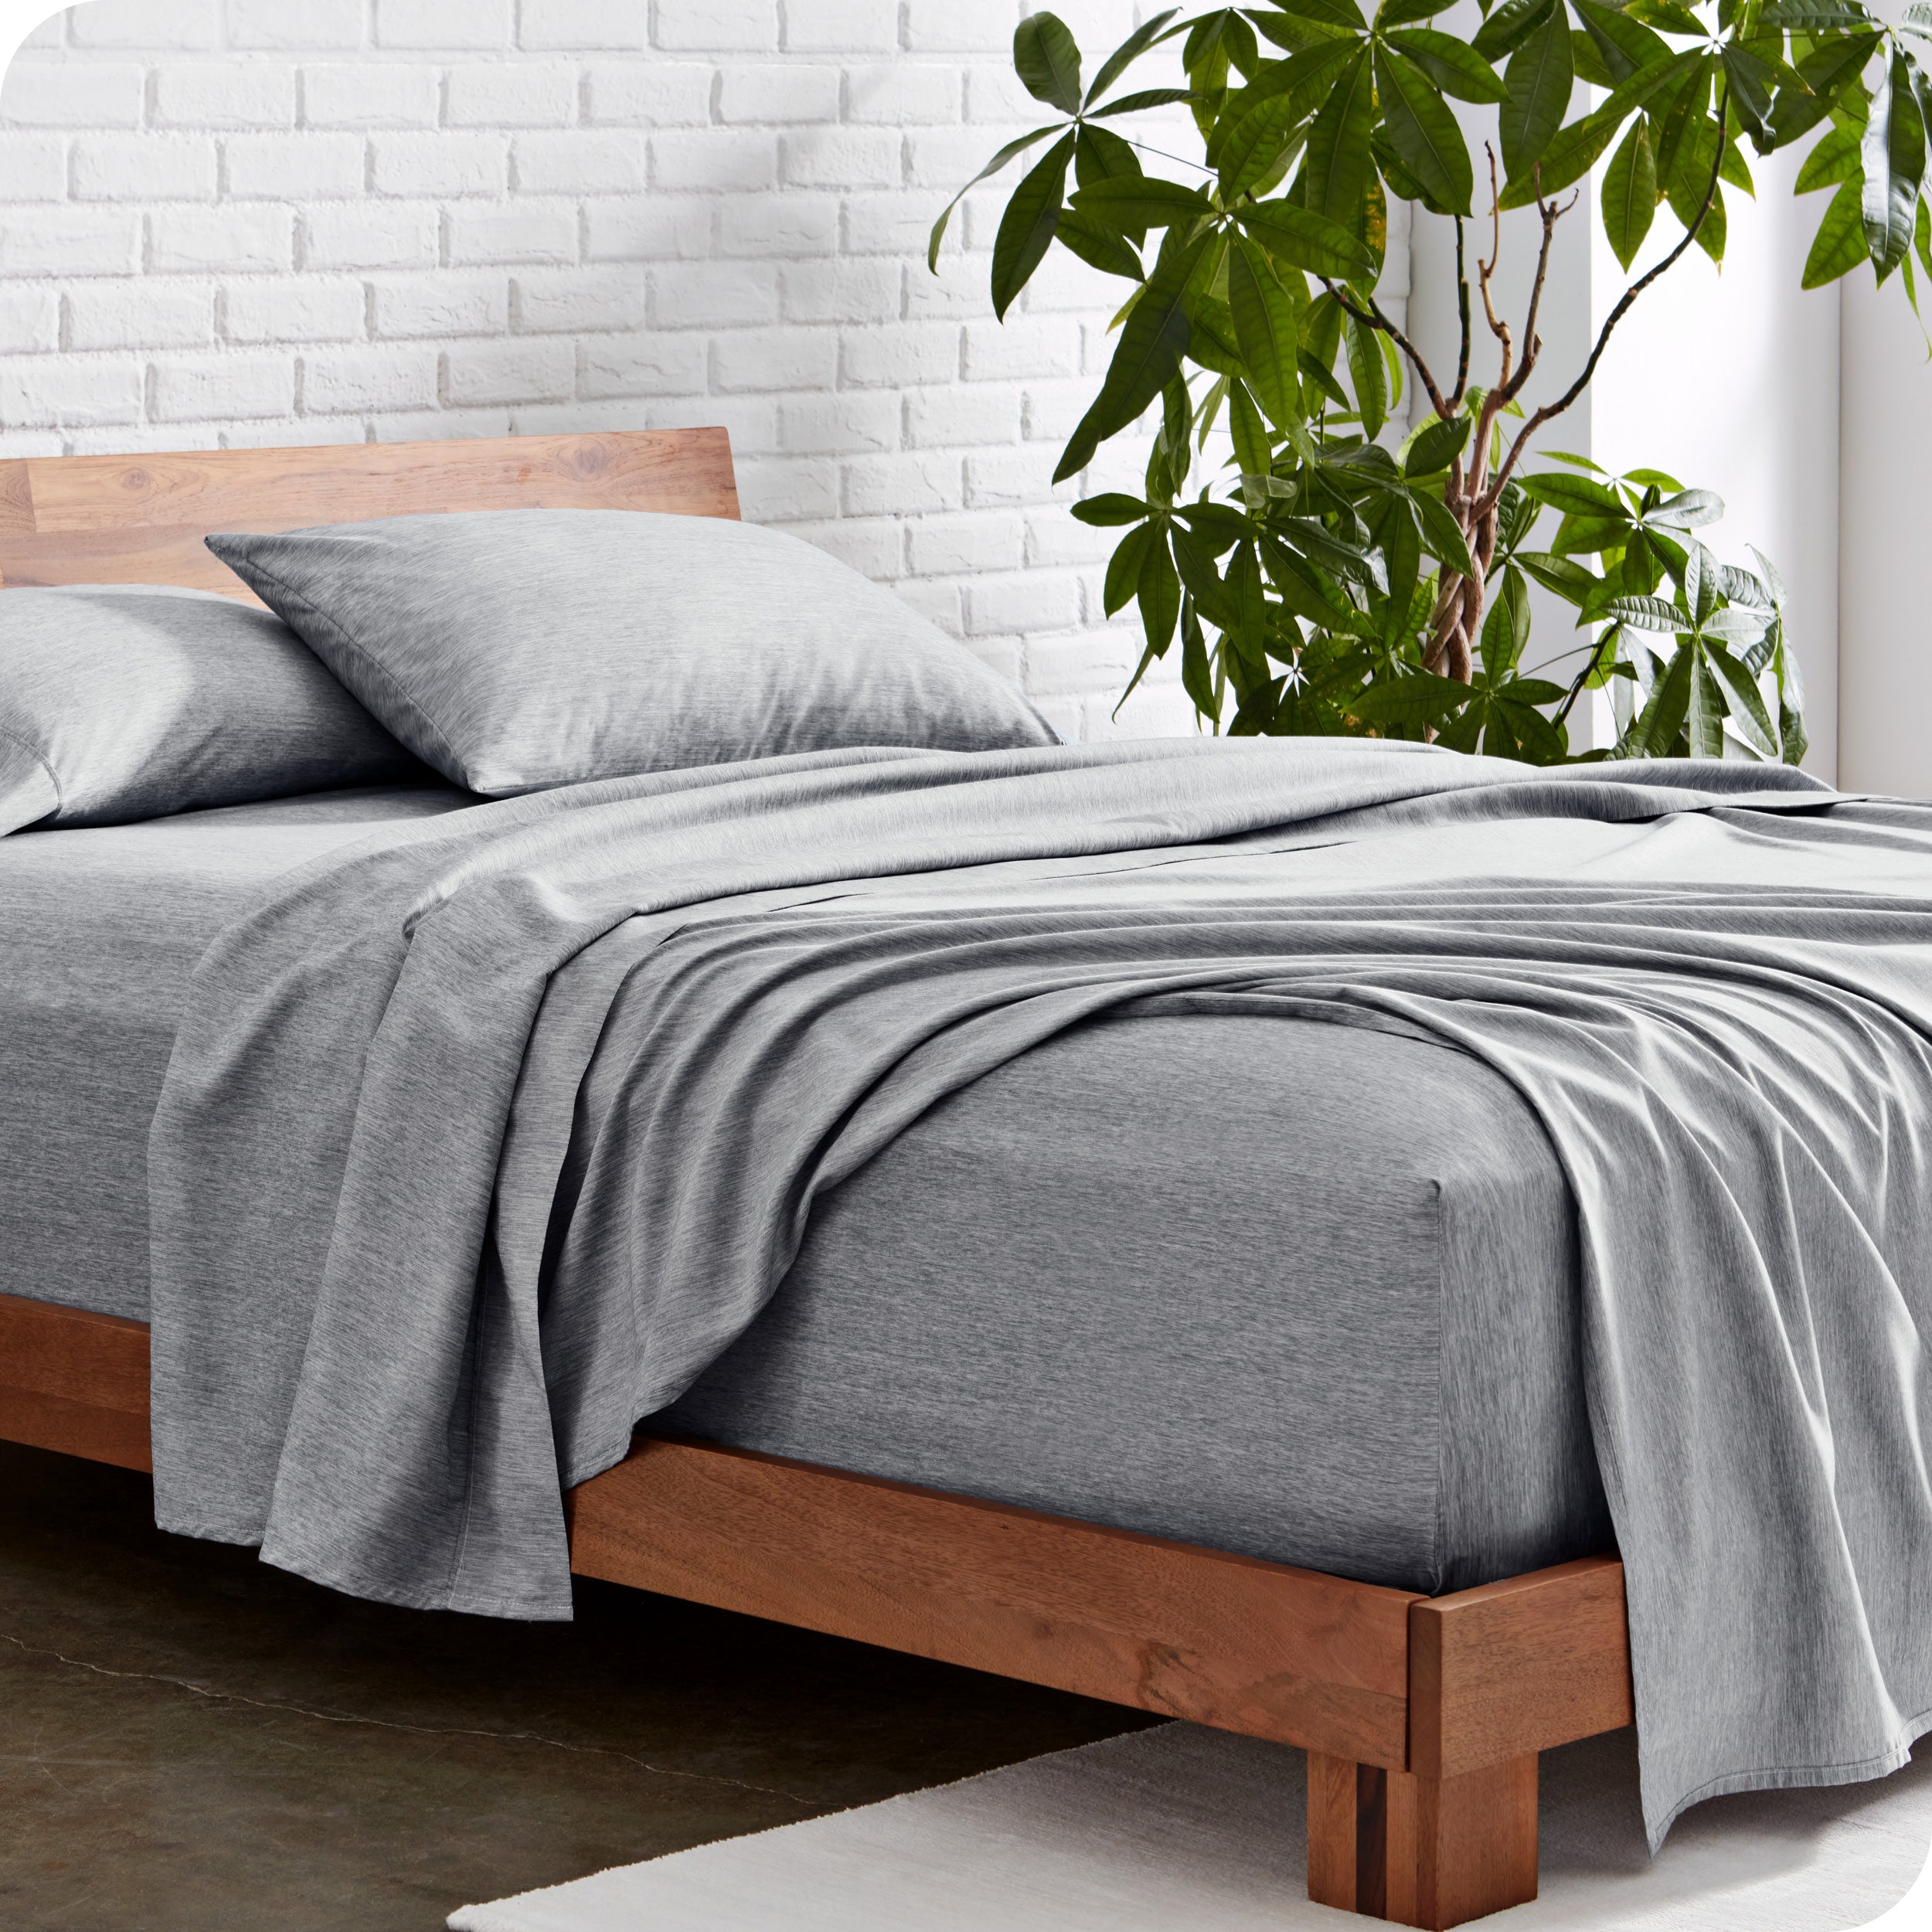 A side view of a bed with grey sheets